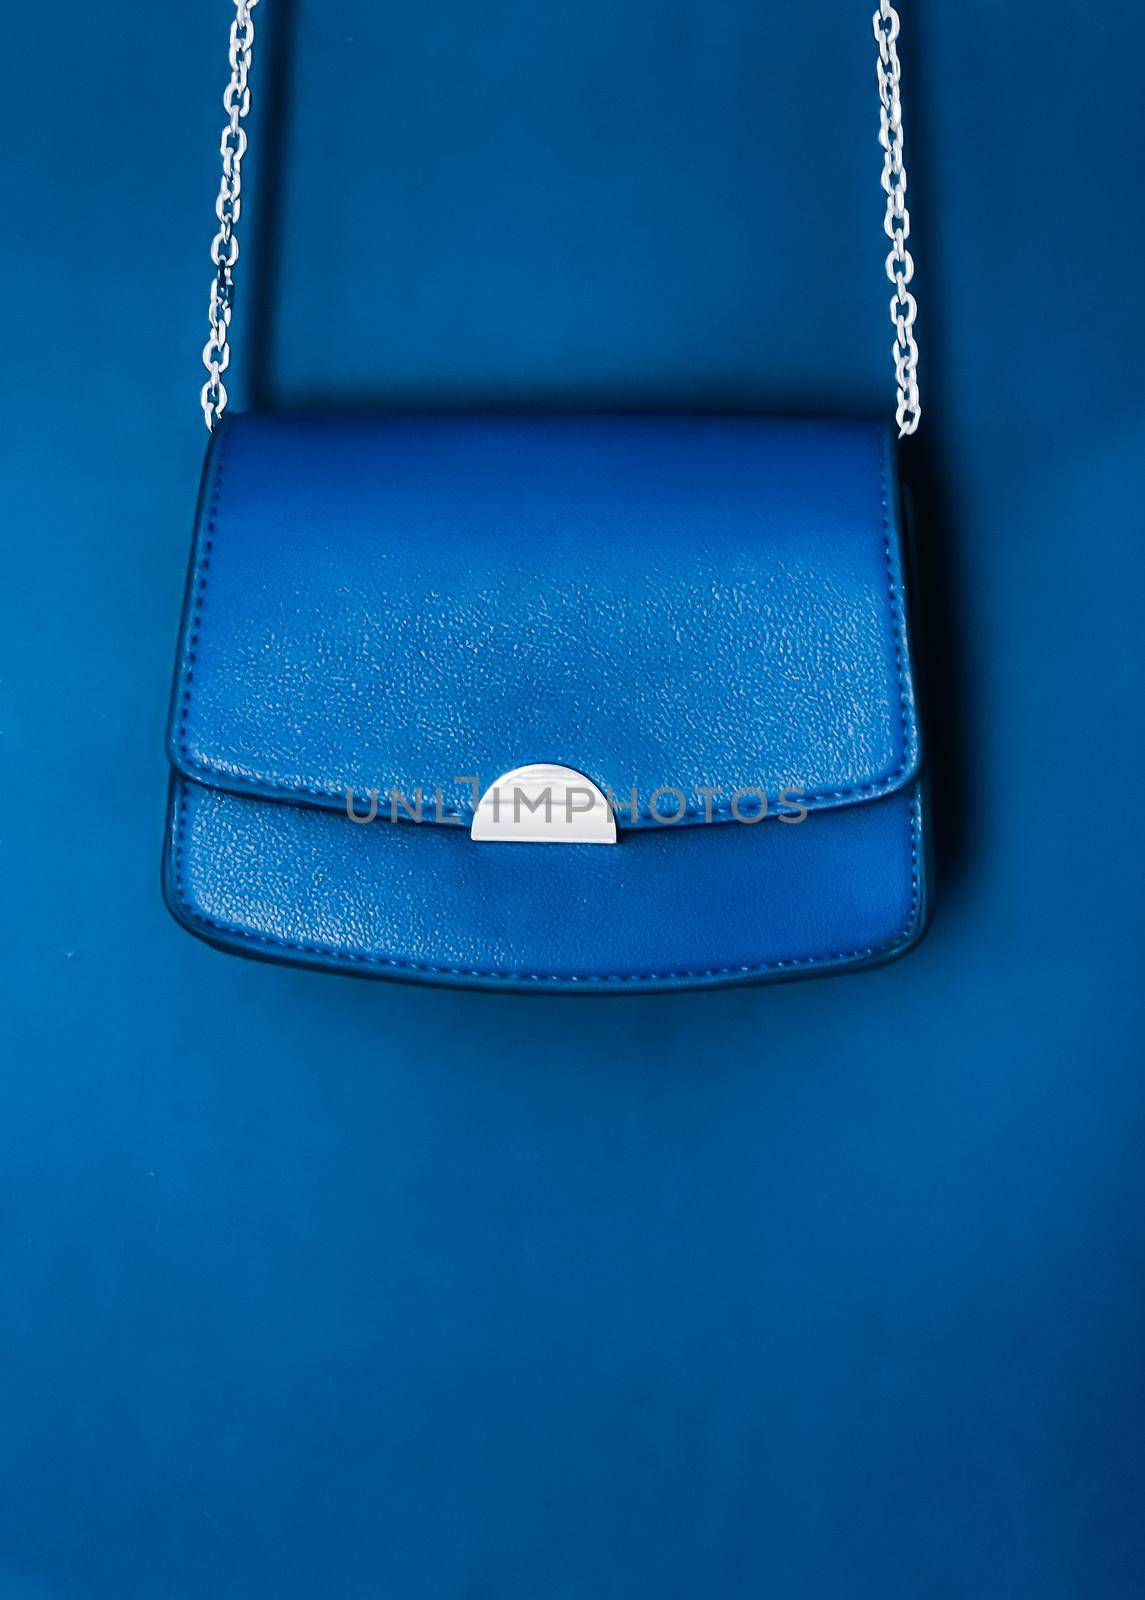 Blue fashionable leather purse with silver details as designer bag and stylish accessory, female fashion and luxury style handbag collection concept